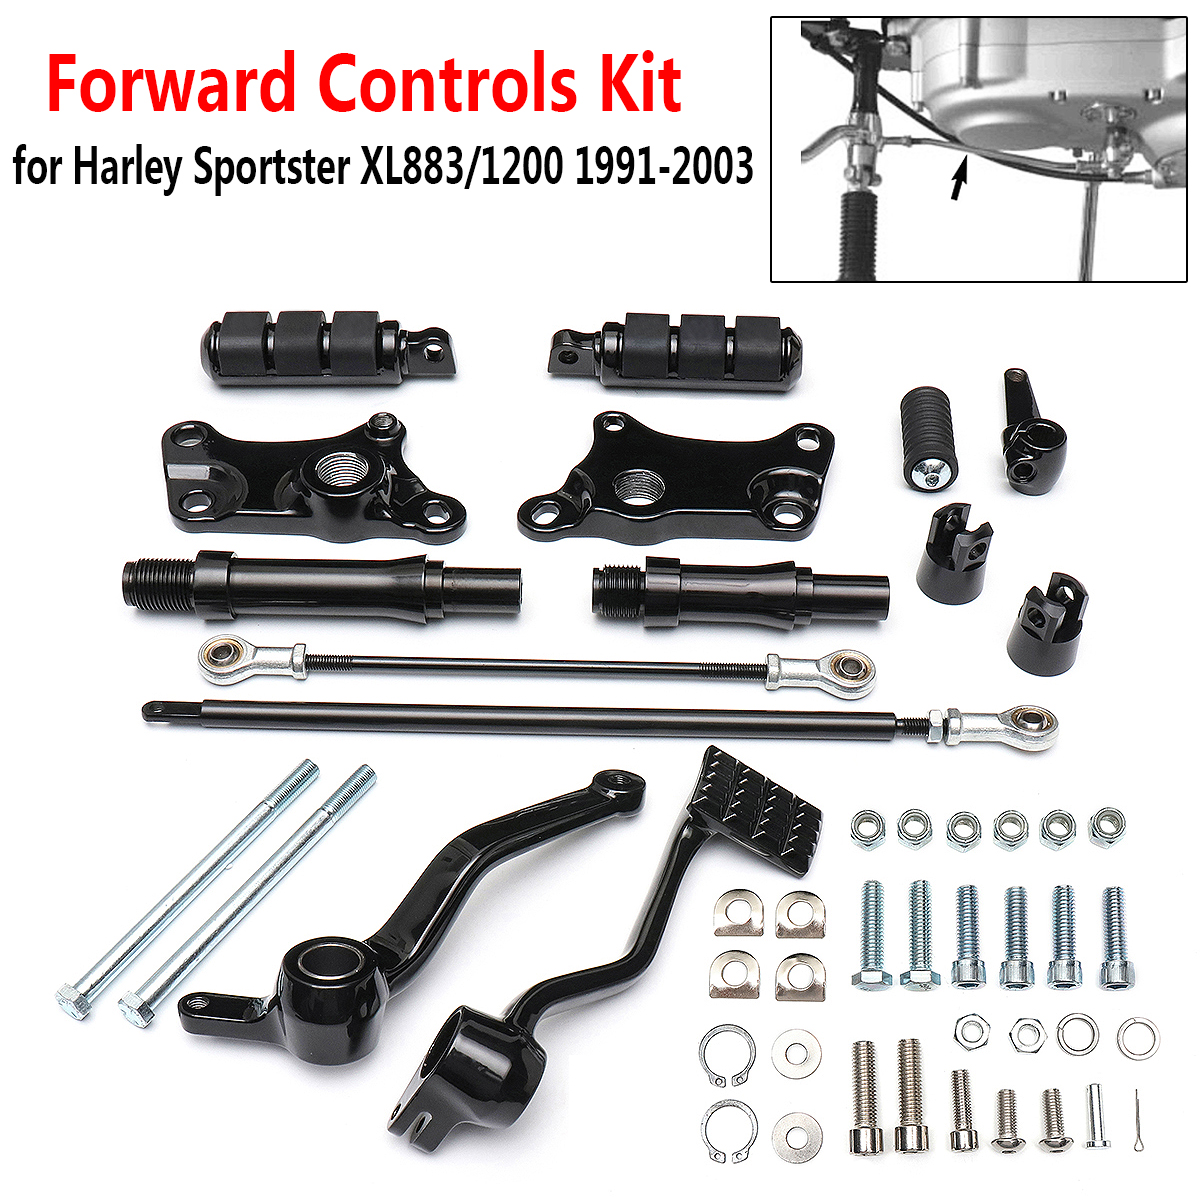 Black-Foot-Pegs-Forward-Controls-Complete-Kit-For-Harley-Sportster-XL883-XL1200-1991-2003-1324510